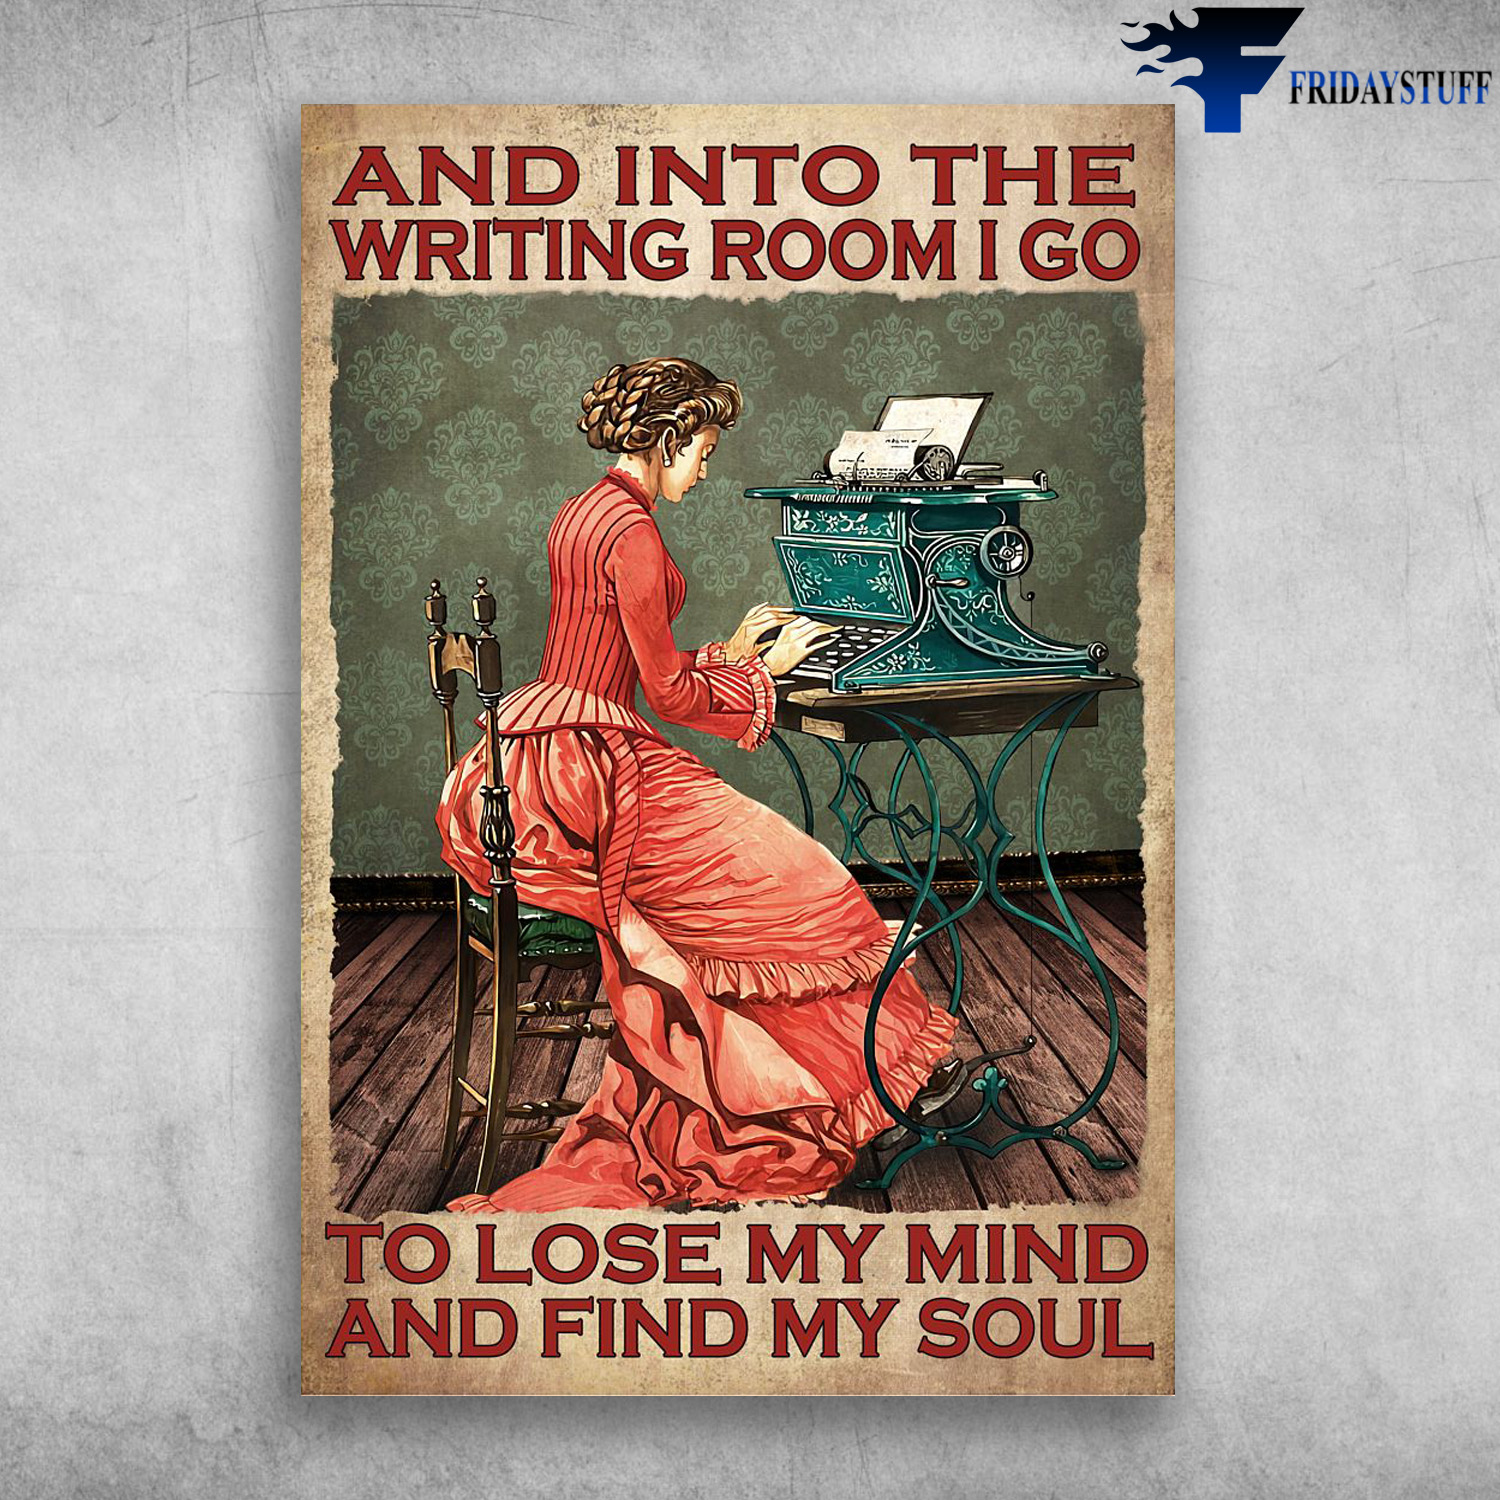 The Lady Witing - And Into The Writing Room, I Go To Lose My Mind And Find My Soul, Girl Writing